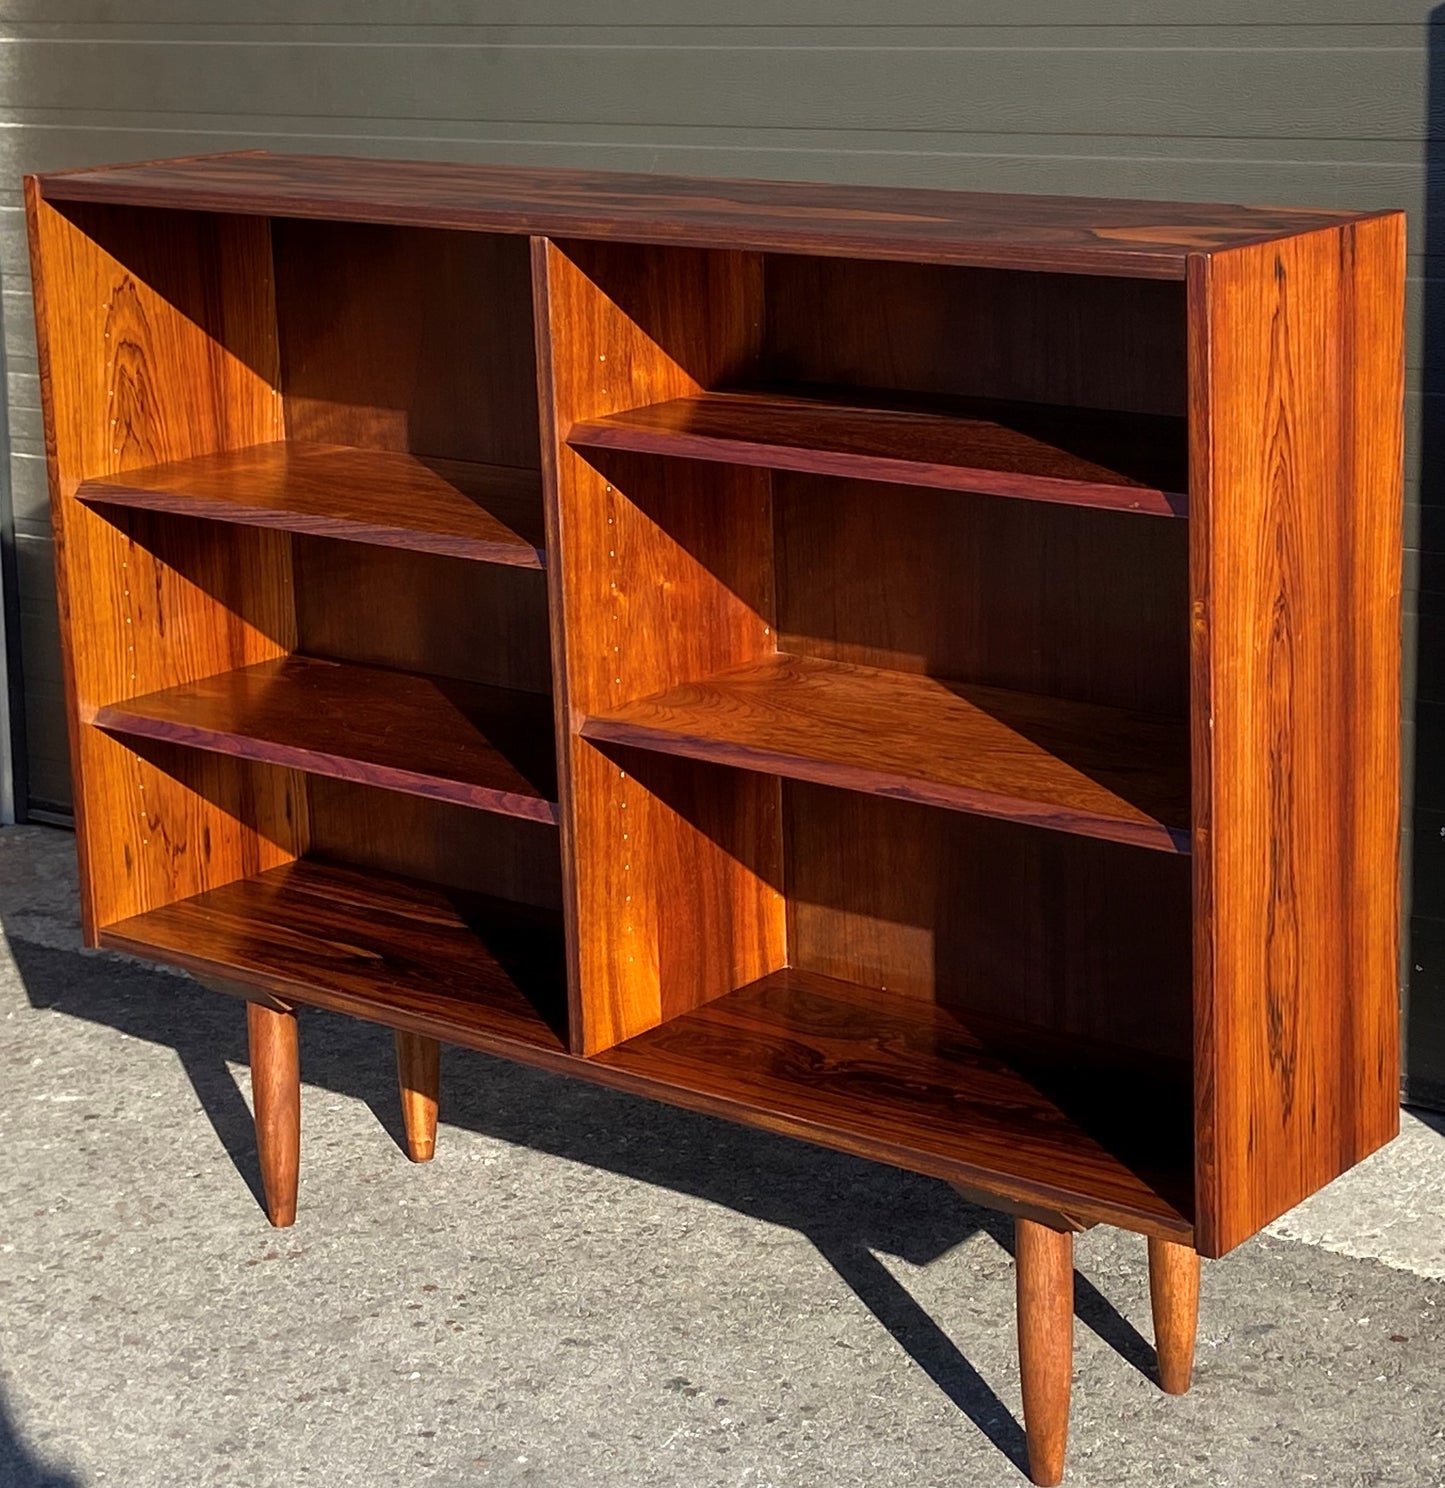 REFINISHED Danish Mid Century Modern Rosewood Bookcase 54.5" by Poul Hundevad